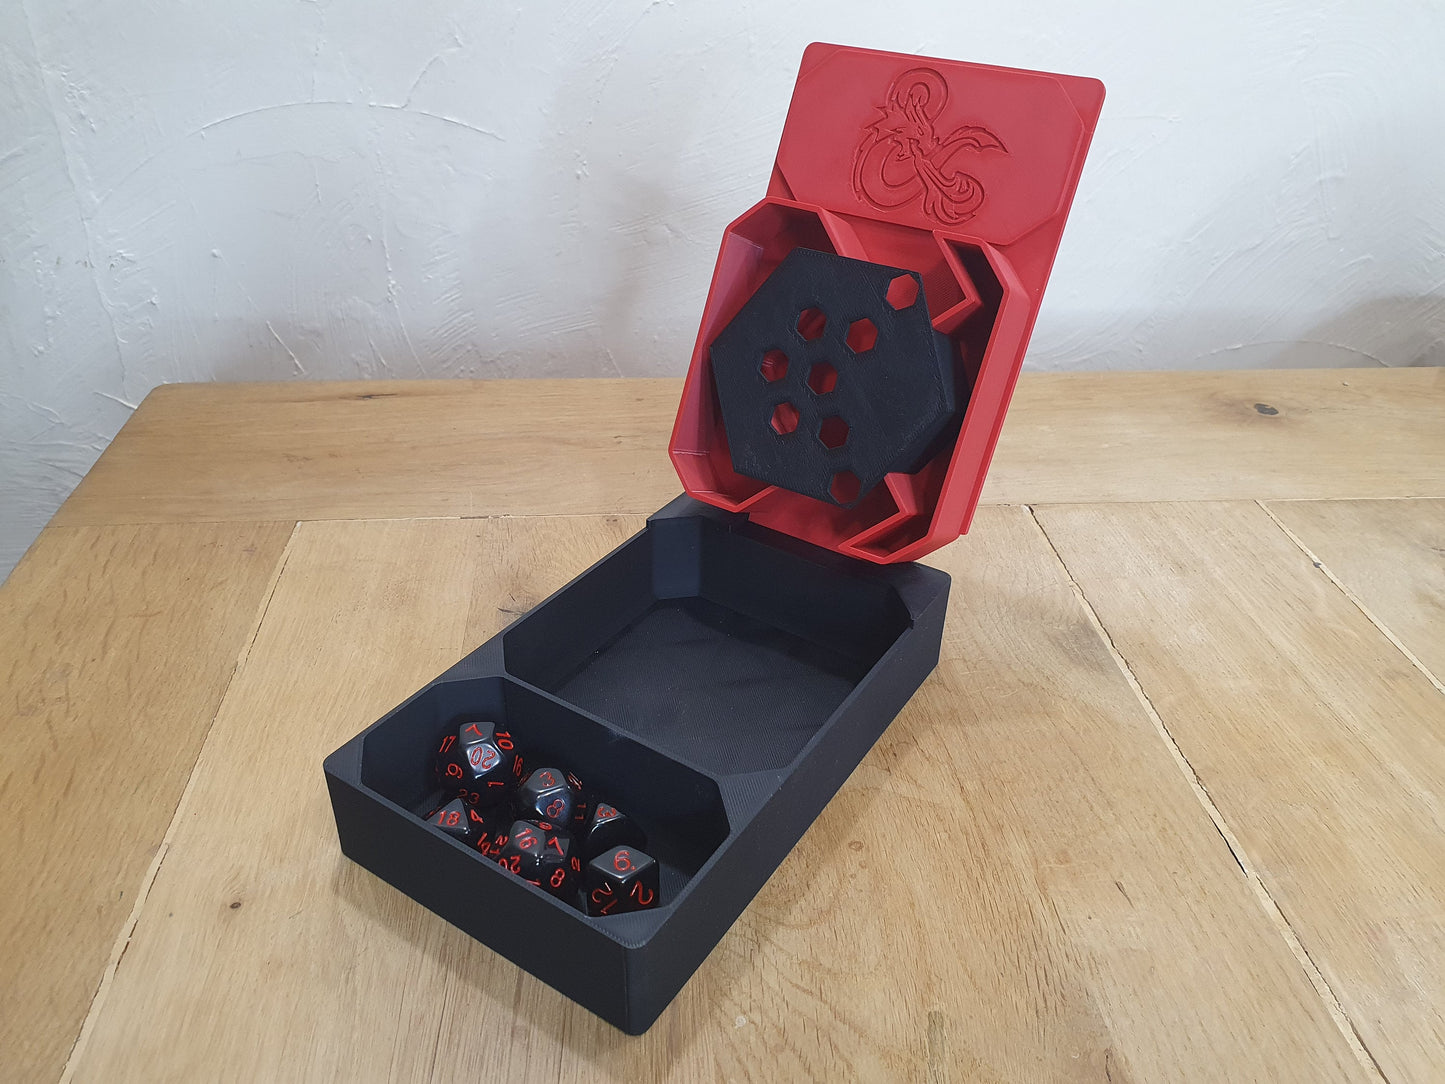 Dungeons & Dragons Combination Dice Tower and Box - 3D printed in any colour you like - text and logos can be personalised!